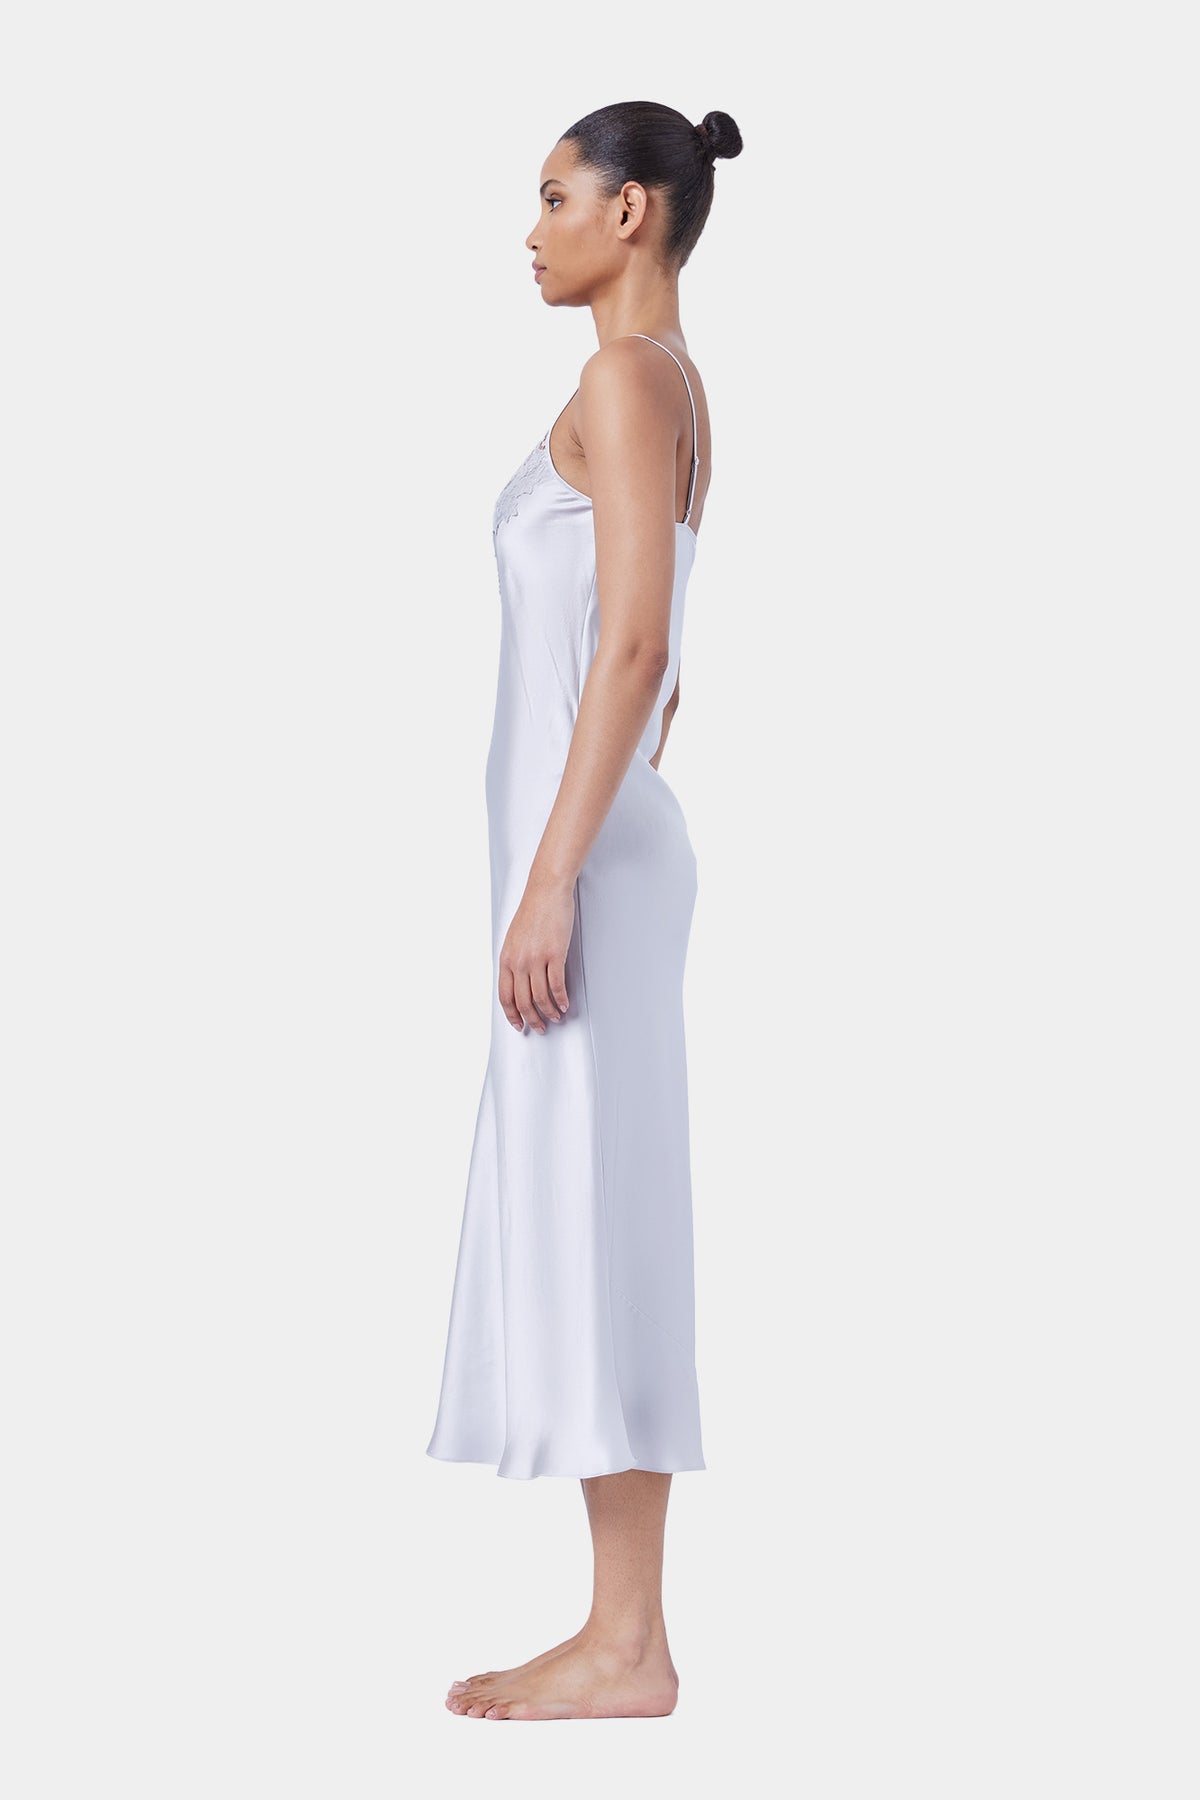 The Silk Lace Slip By GINIA In Silver